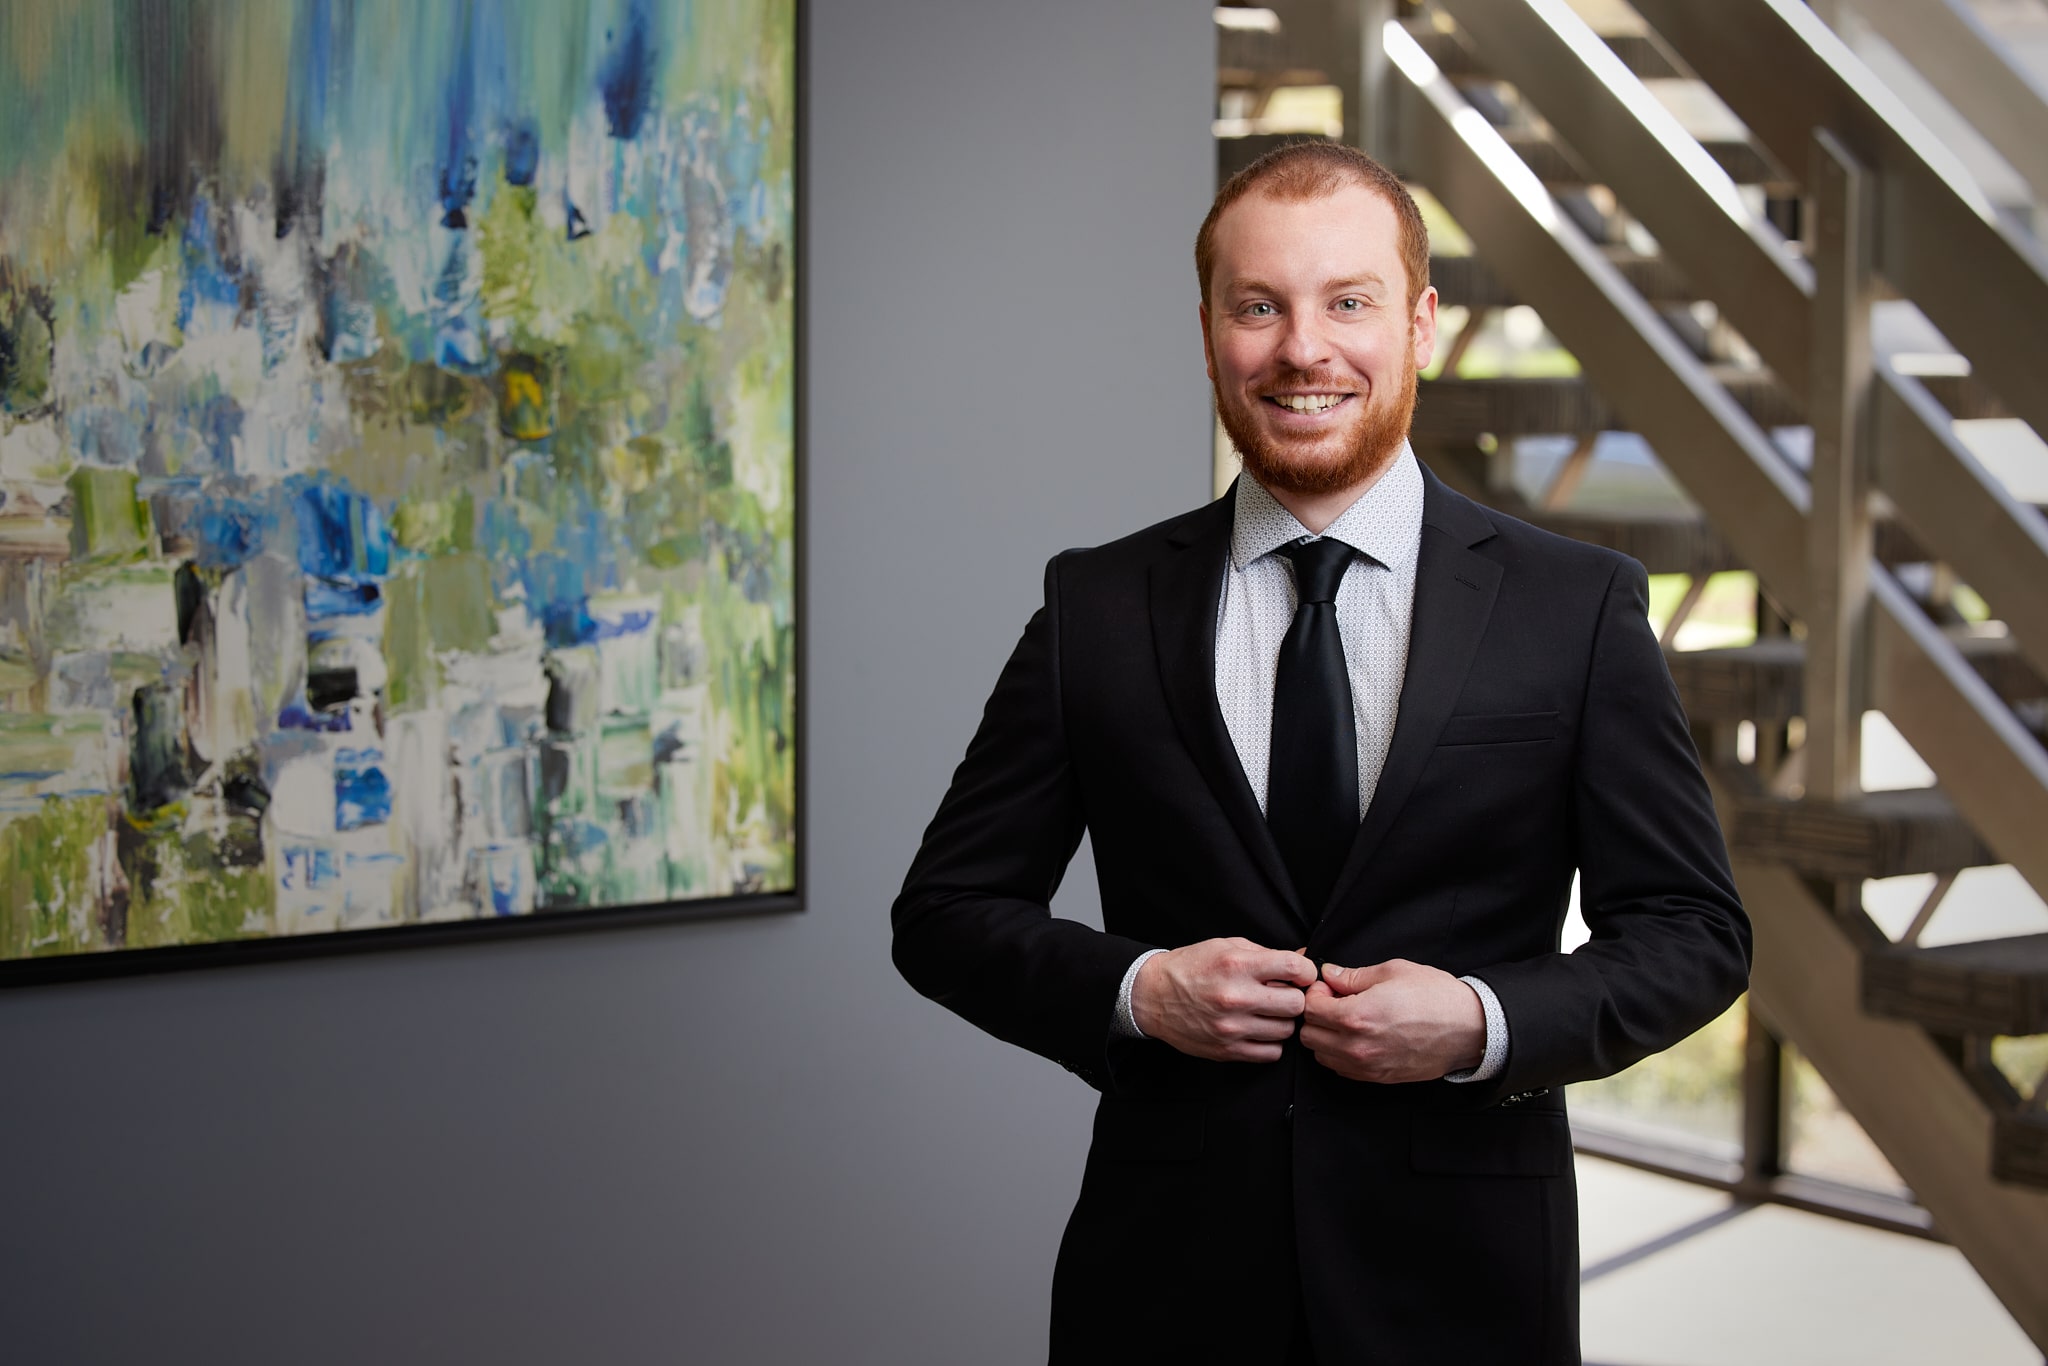 An image of Jason Gruninger CPA, a Manager at Ford Keast LLP in London, Ontario